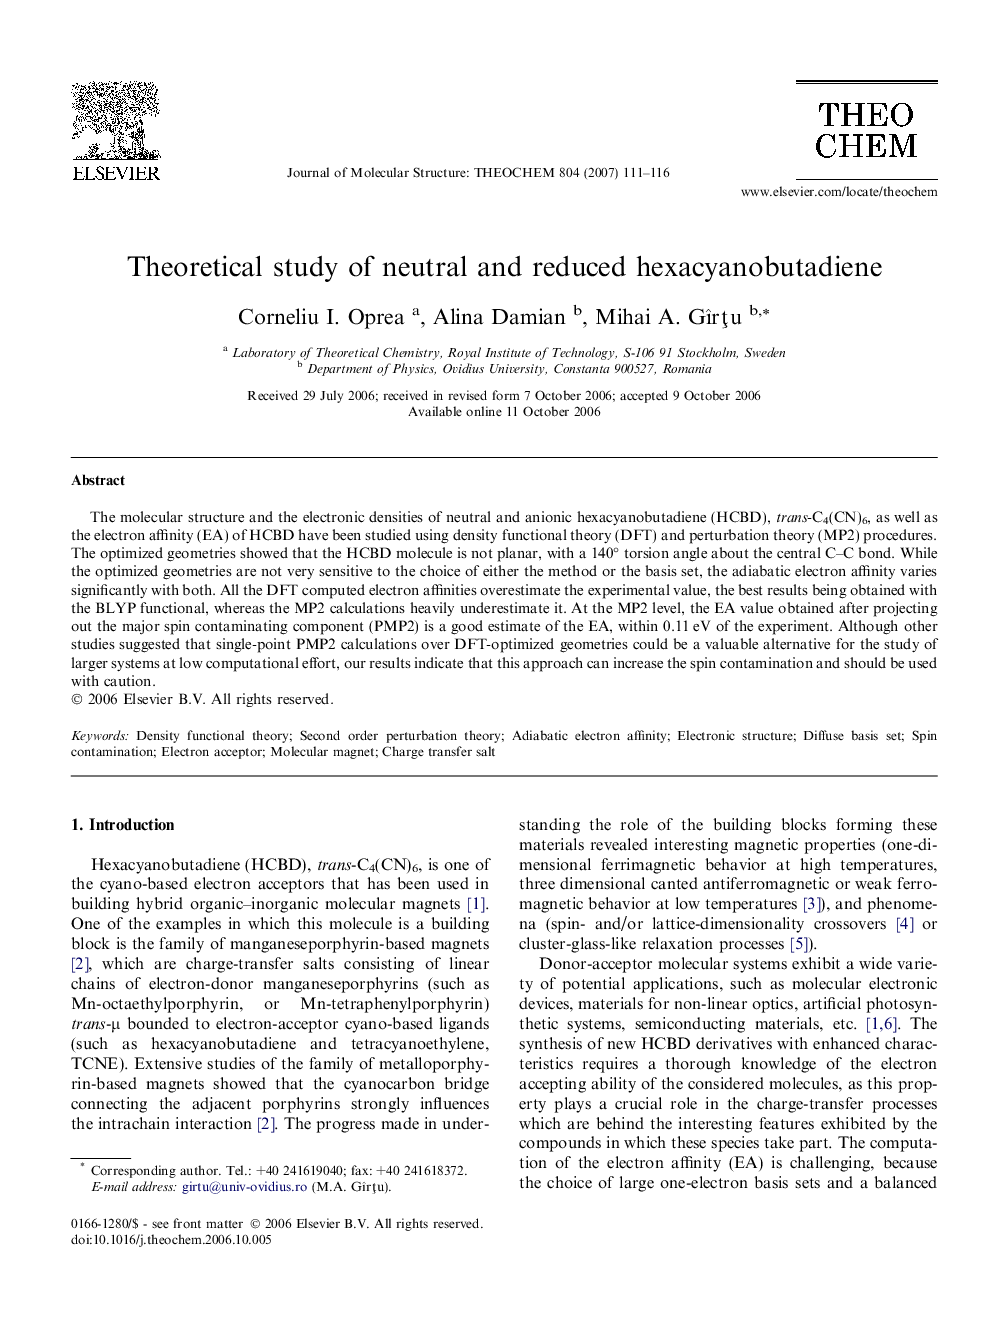 Theoretical study of neutral and reduced hexacyanobutadiene